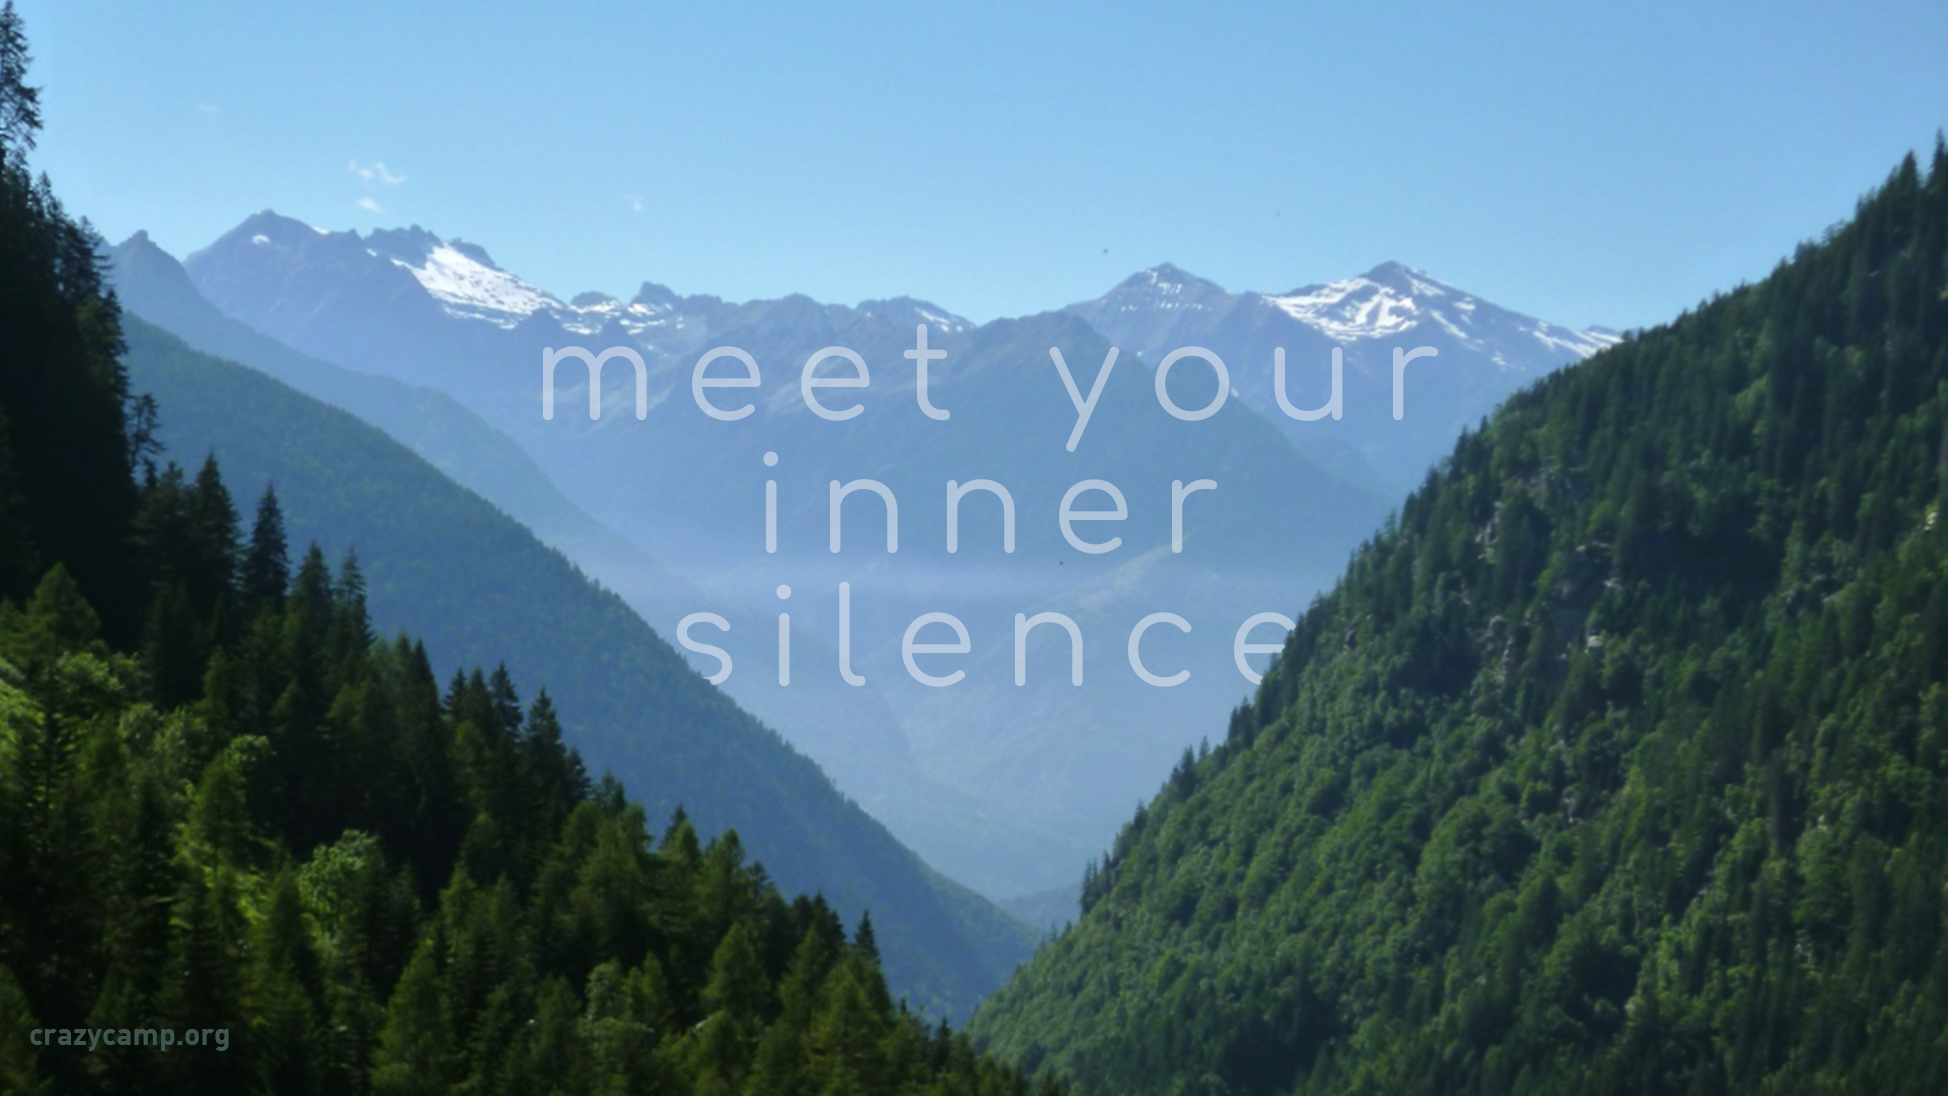 Landscape with text Meet Your Inner Silence